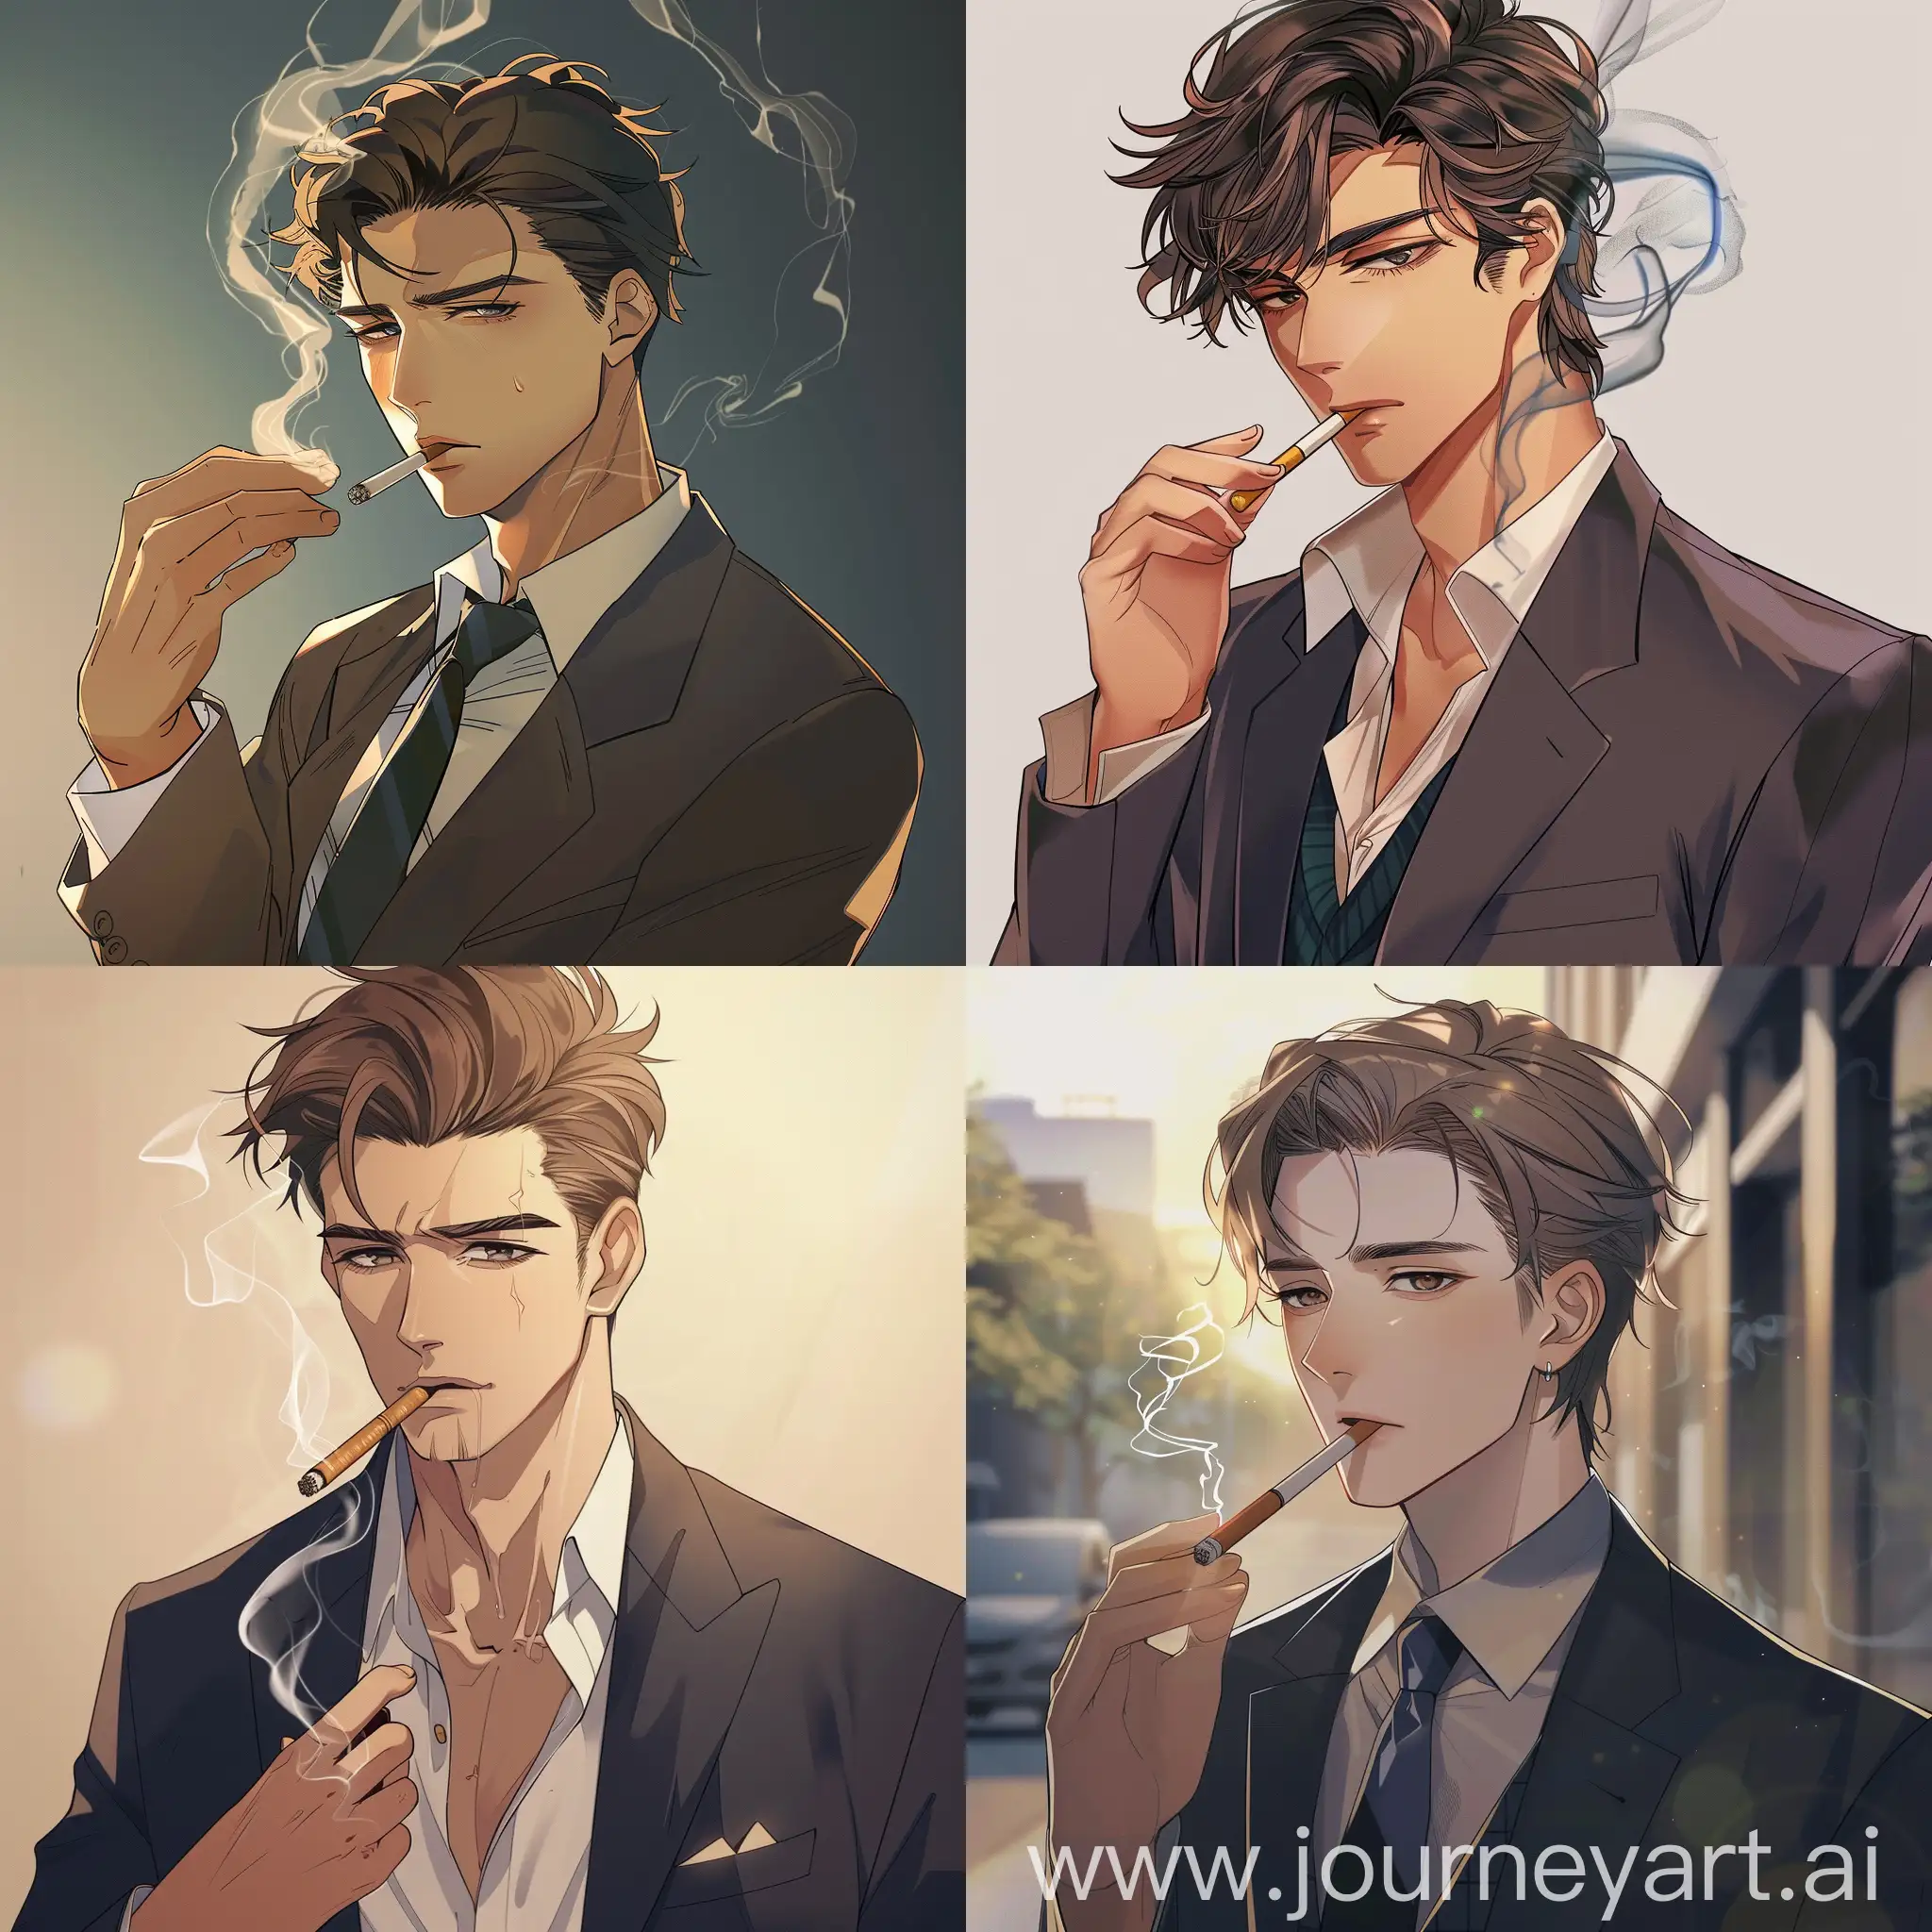 Sophisticated-Anime-Man-Smoking-in-Stylish-Suit